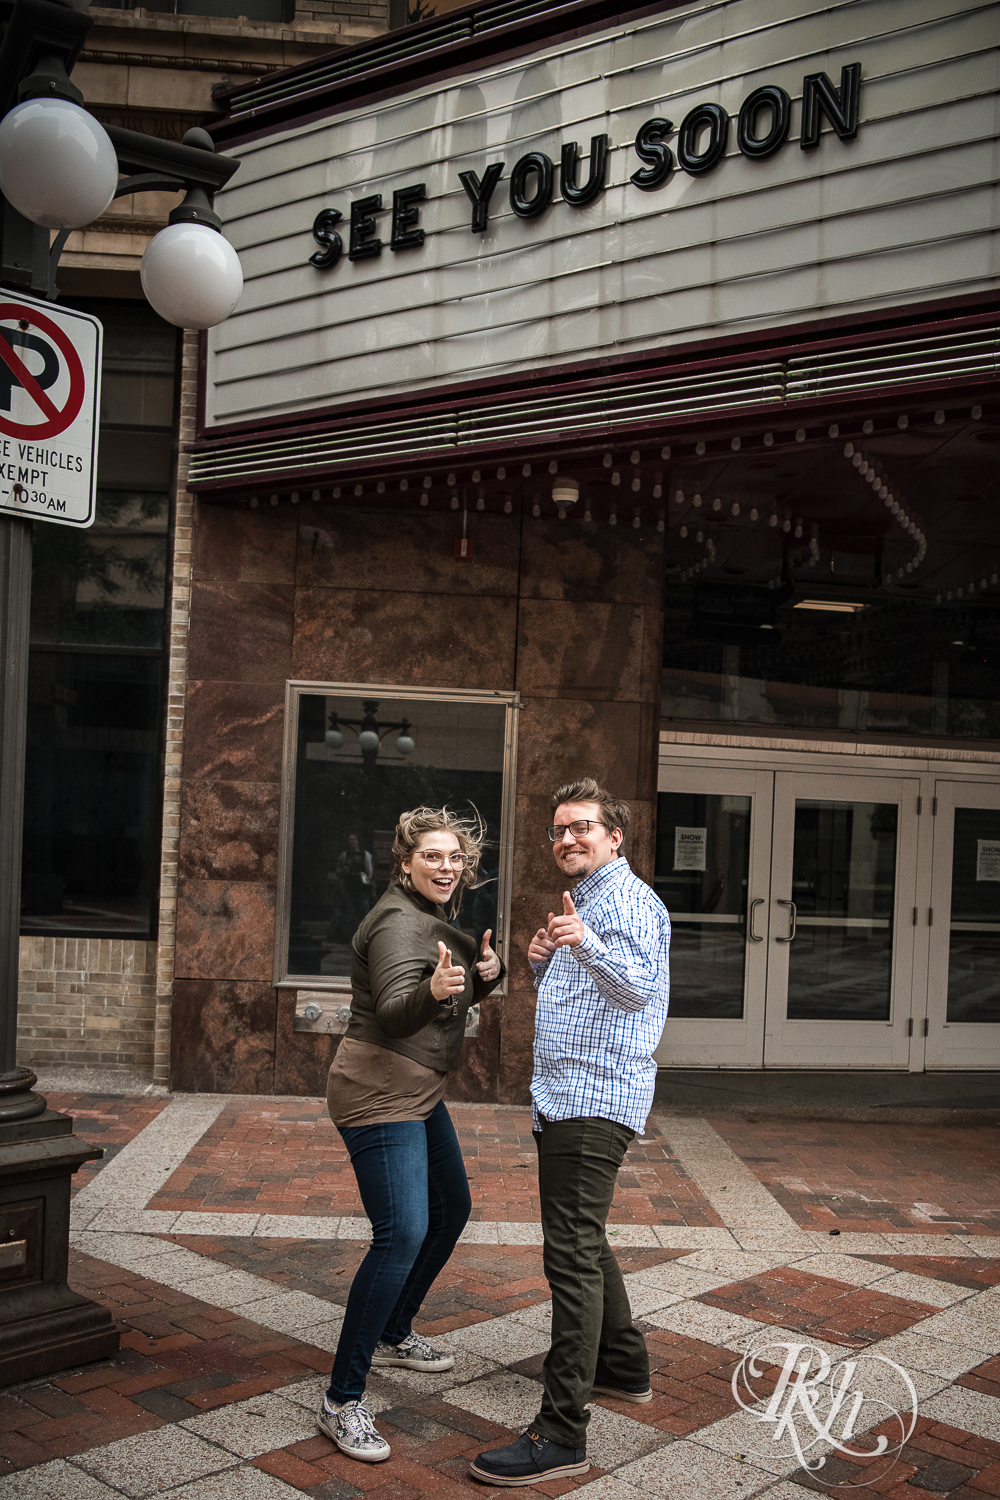 Blond woman with glasses and man with glasses pointing in front of the Palace Theater in Saint Paul, Minnesota.